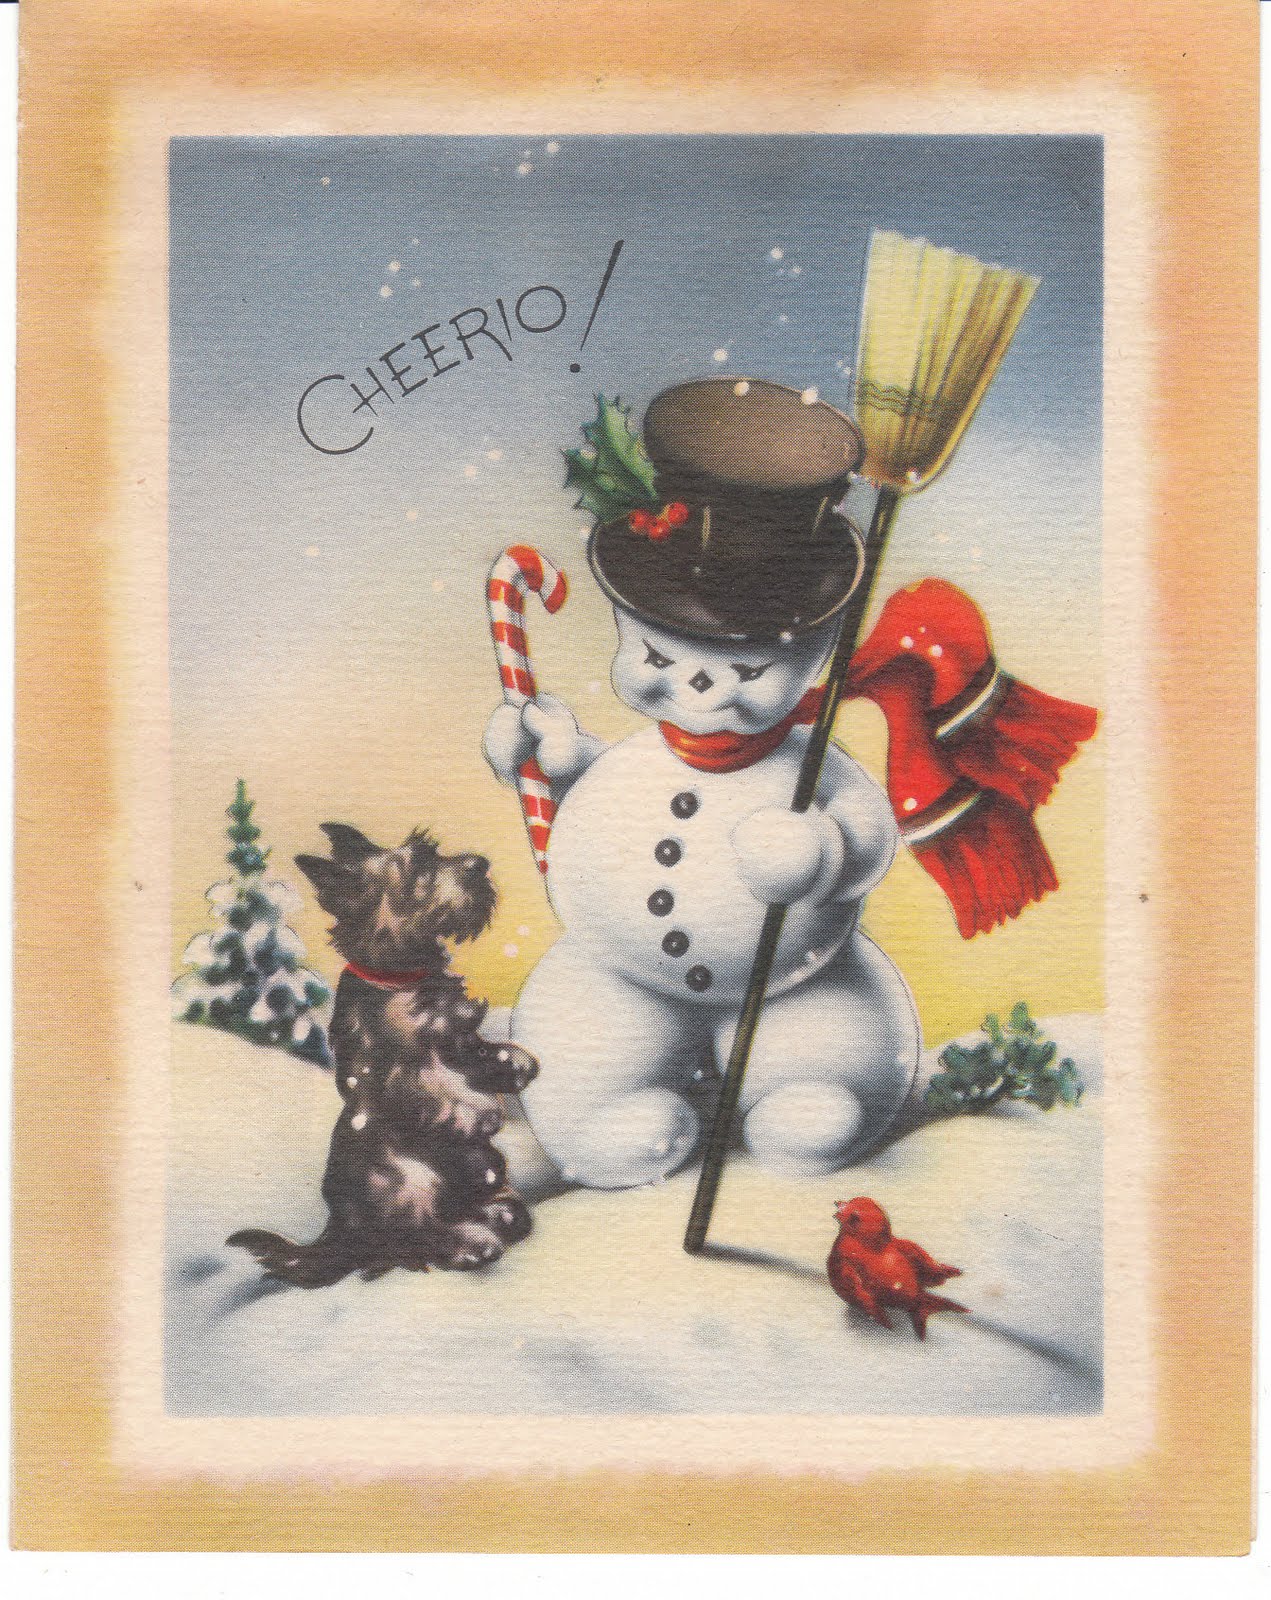 View from the Birdhouse: Vintage Christmas Cards - 1940's to 1950's